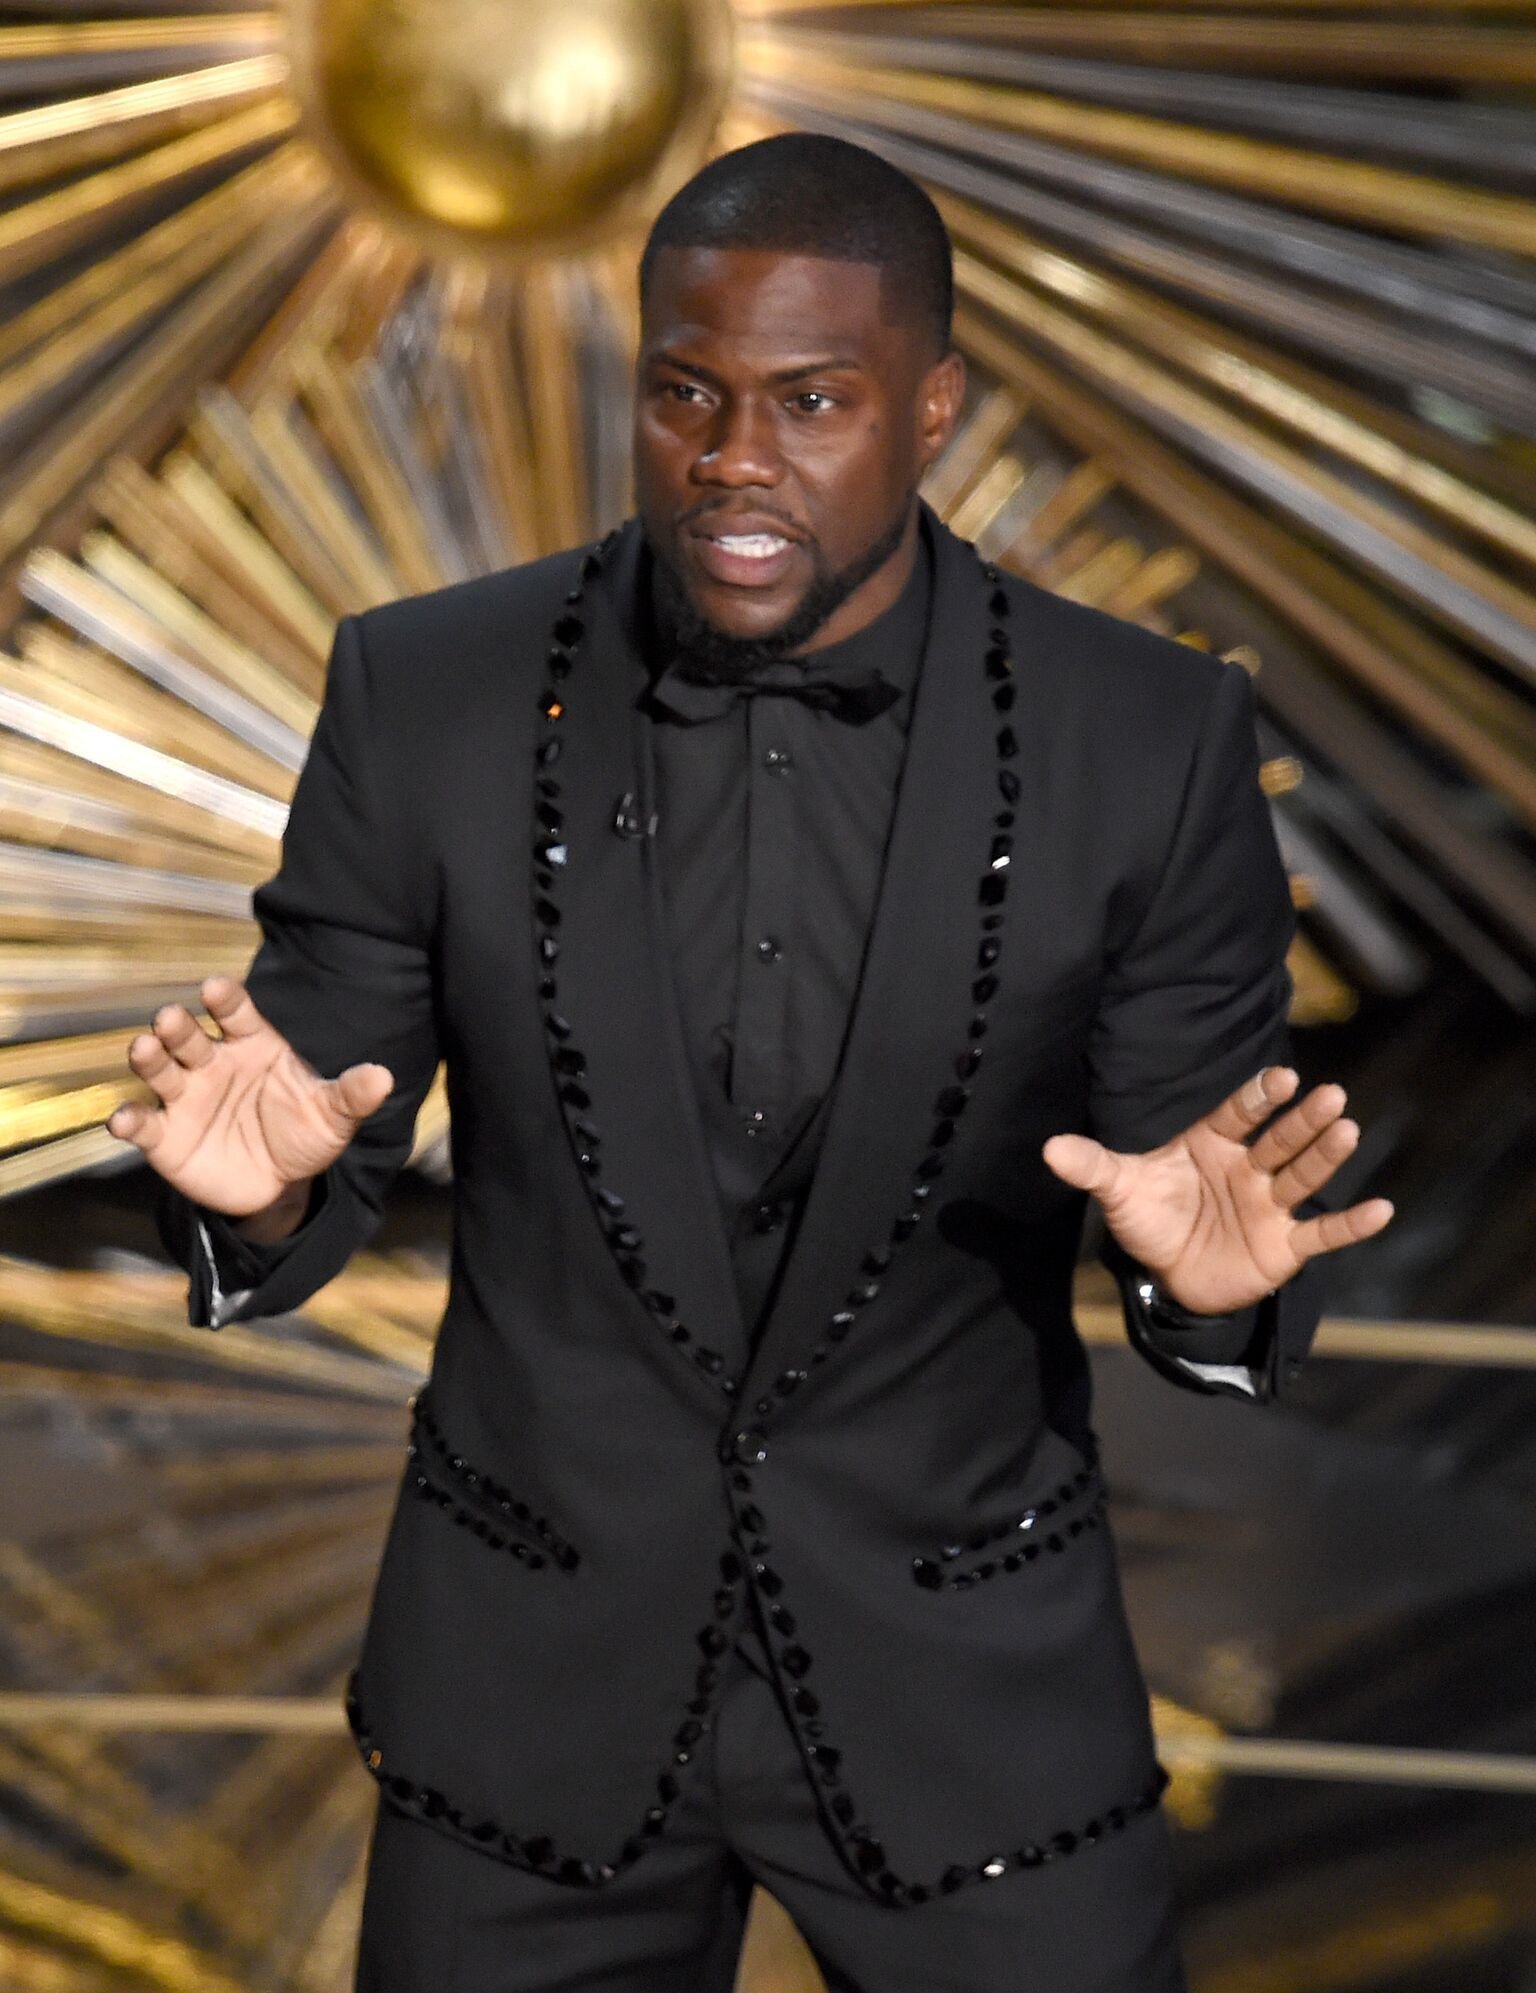 Actor Kevin Hart speaks onstage during the 88th Annual Academy Awards at the Dolby Theater l Shutterstock